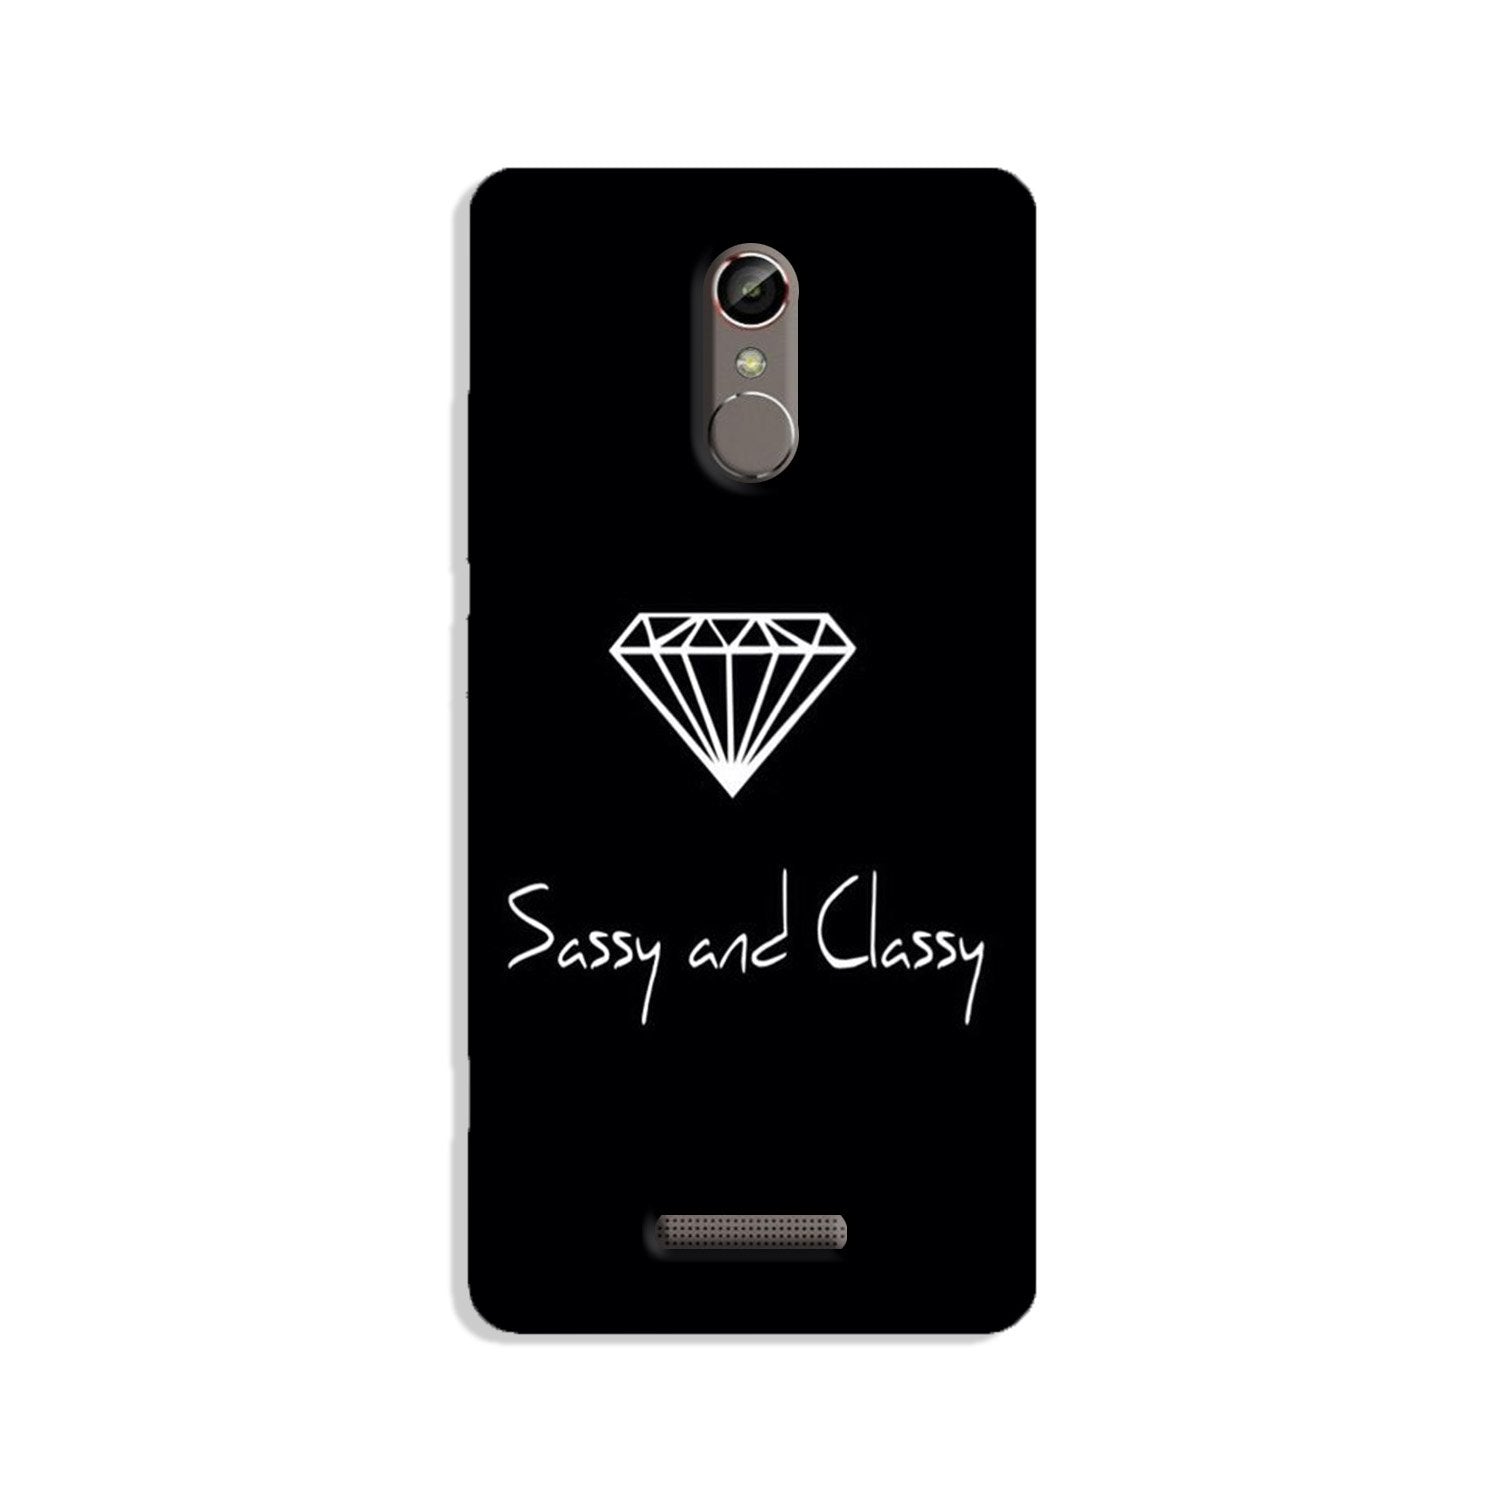 Sassy and Classy Case for Gionee S6s (Design No. 264)